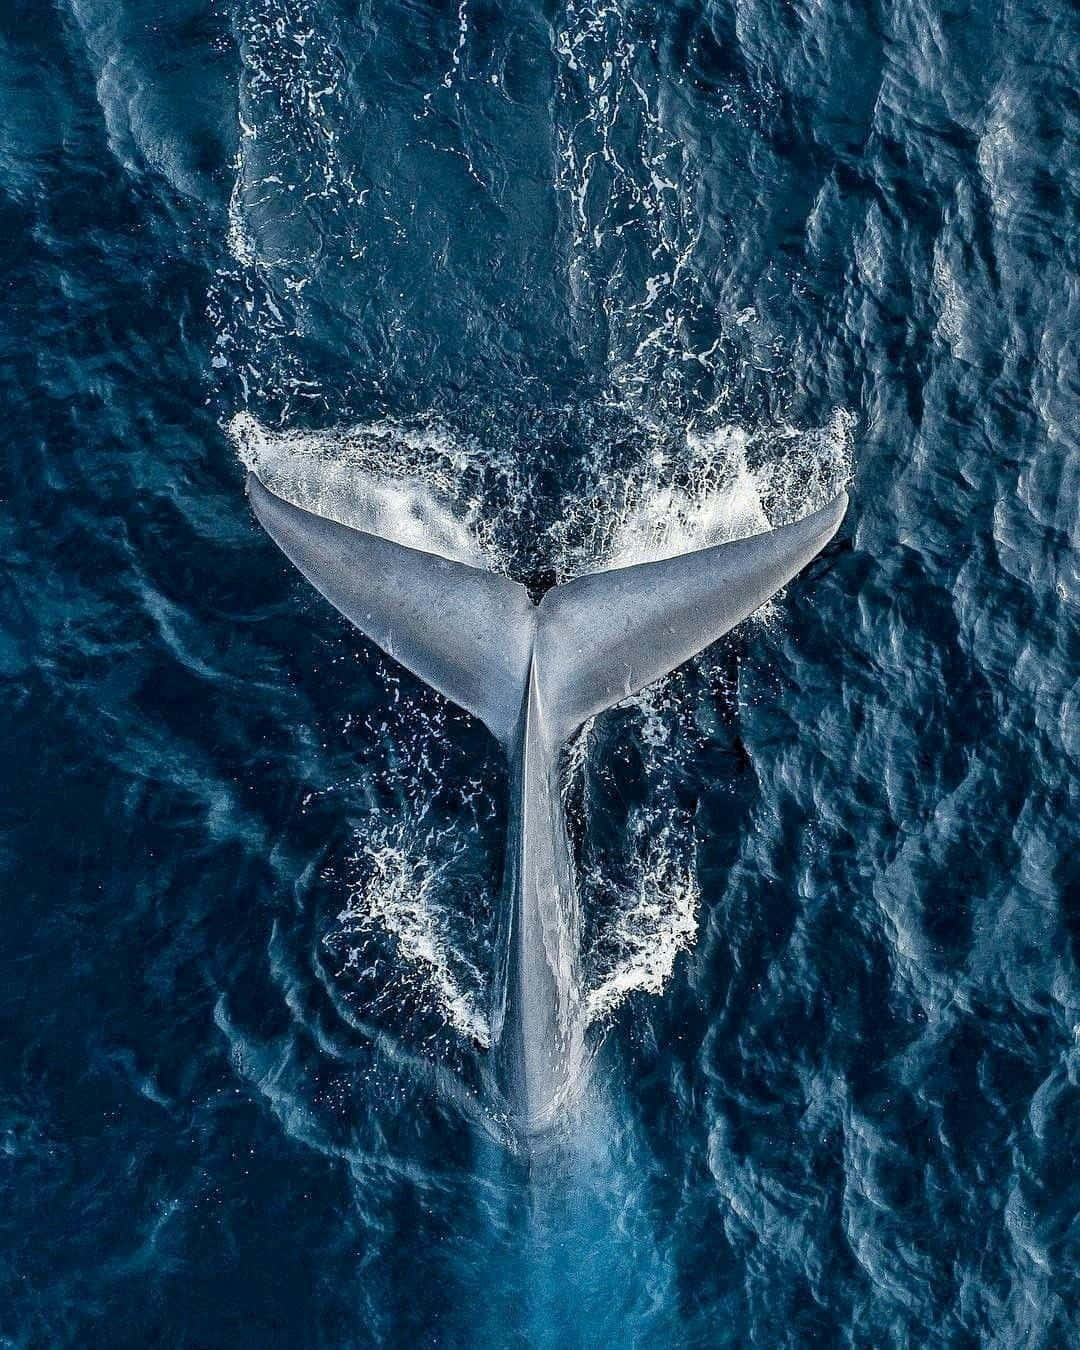 Best 100 Blue Whale Pictures  Download Free Images on Unsplash